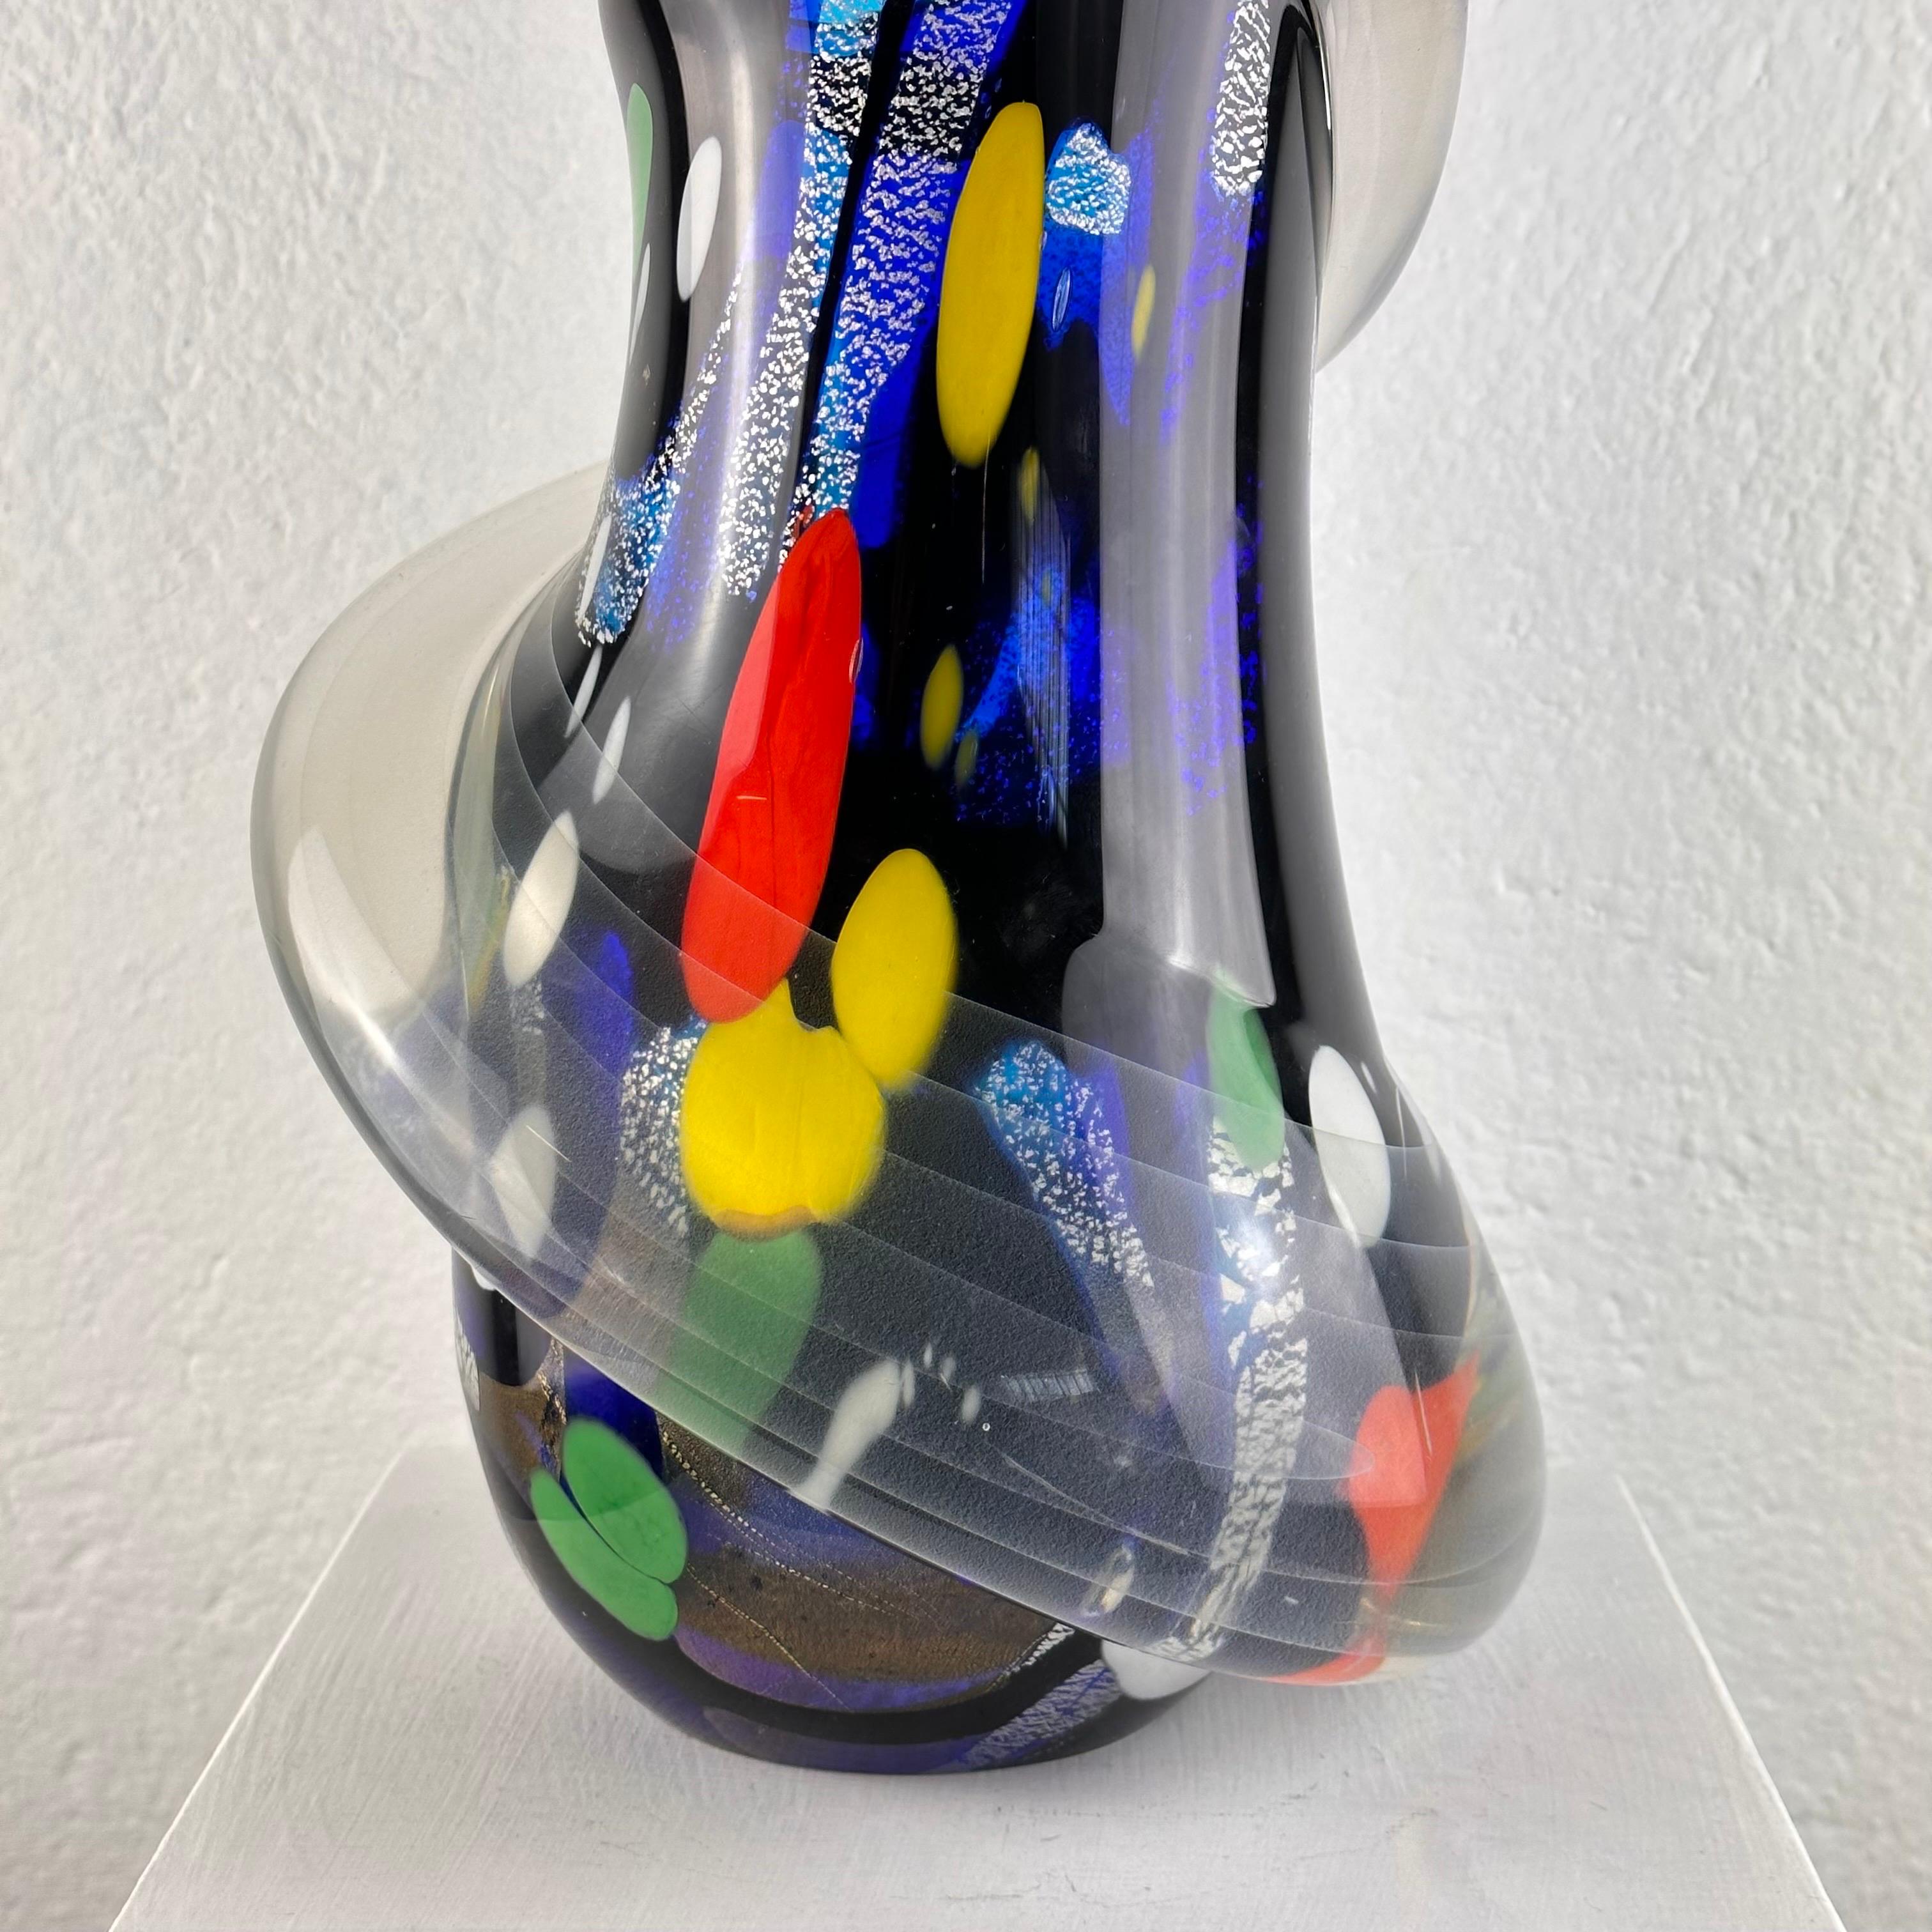 Exquisite Abstract Murano Glass Vase by S. Toso, Signed 1970s Masterpiece For Sale 2